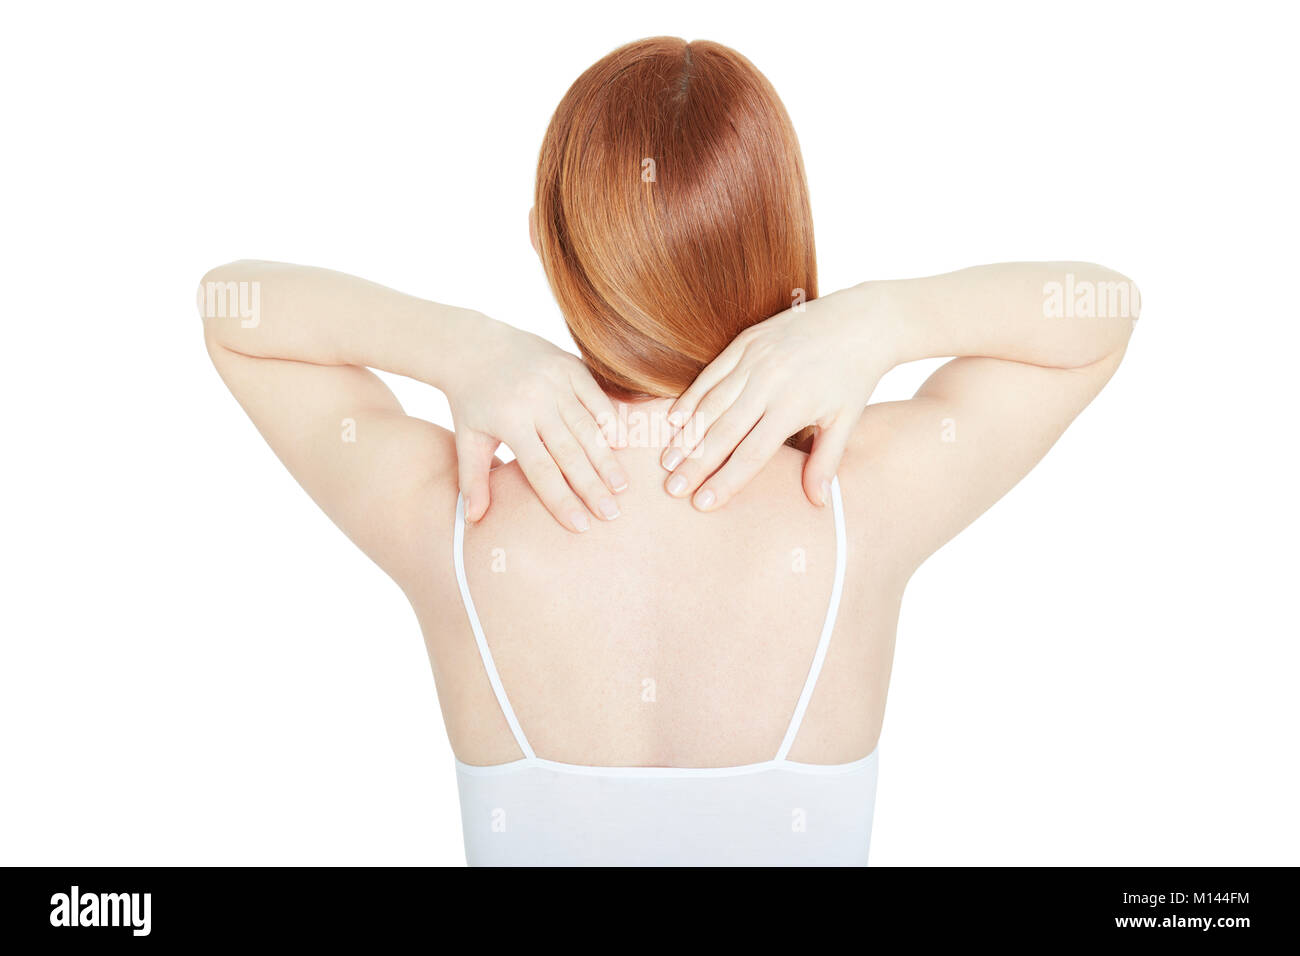 Woman with Upper Back and Neck Pain Stock Image - Image of medical, back:  34197823